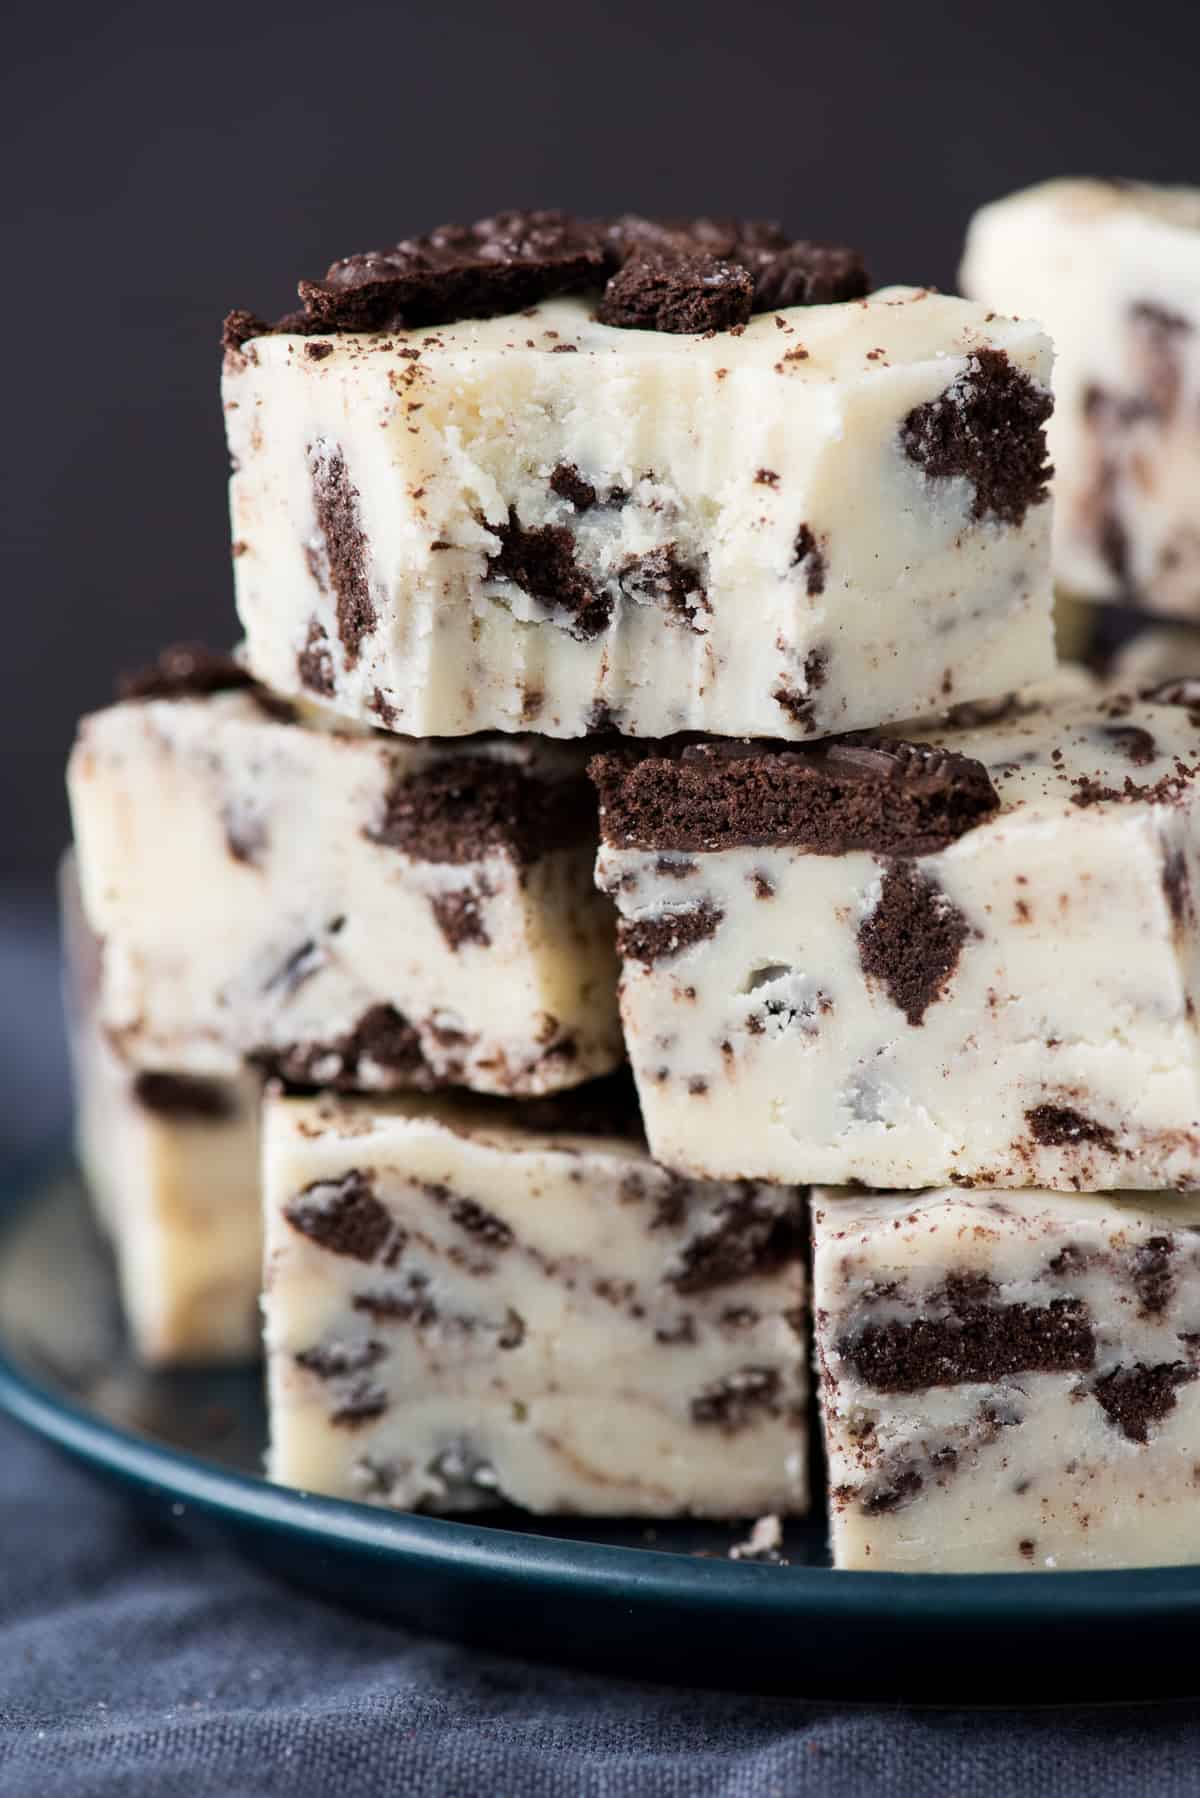 oreo fudge cut into squares and stacked on top of each other on dark background